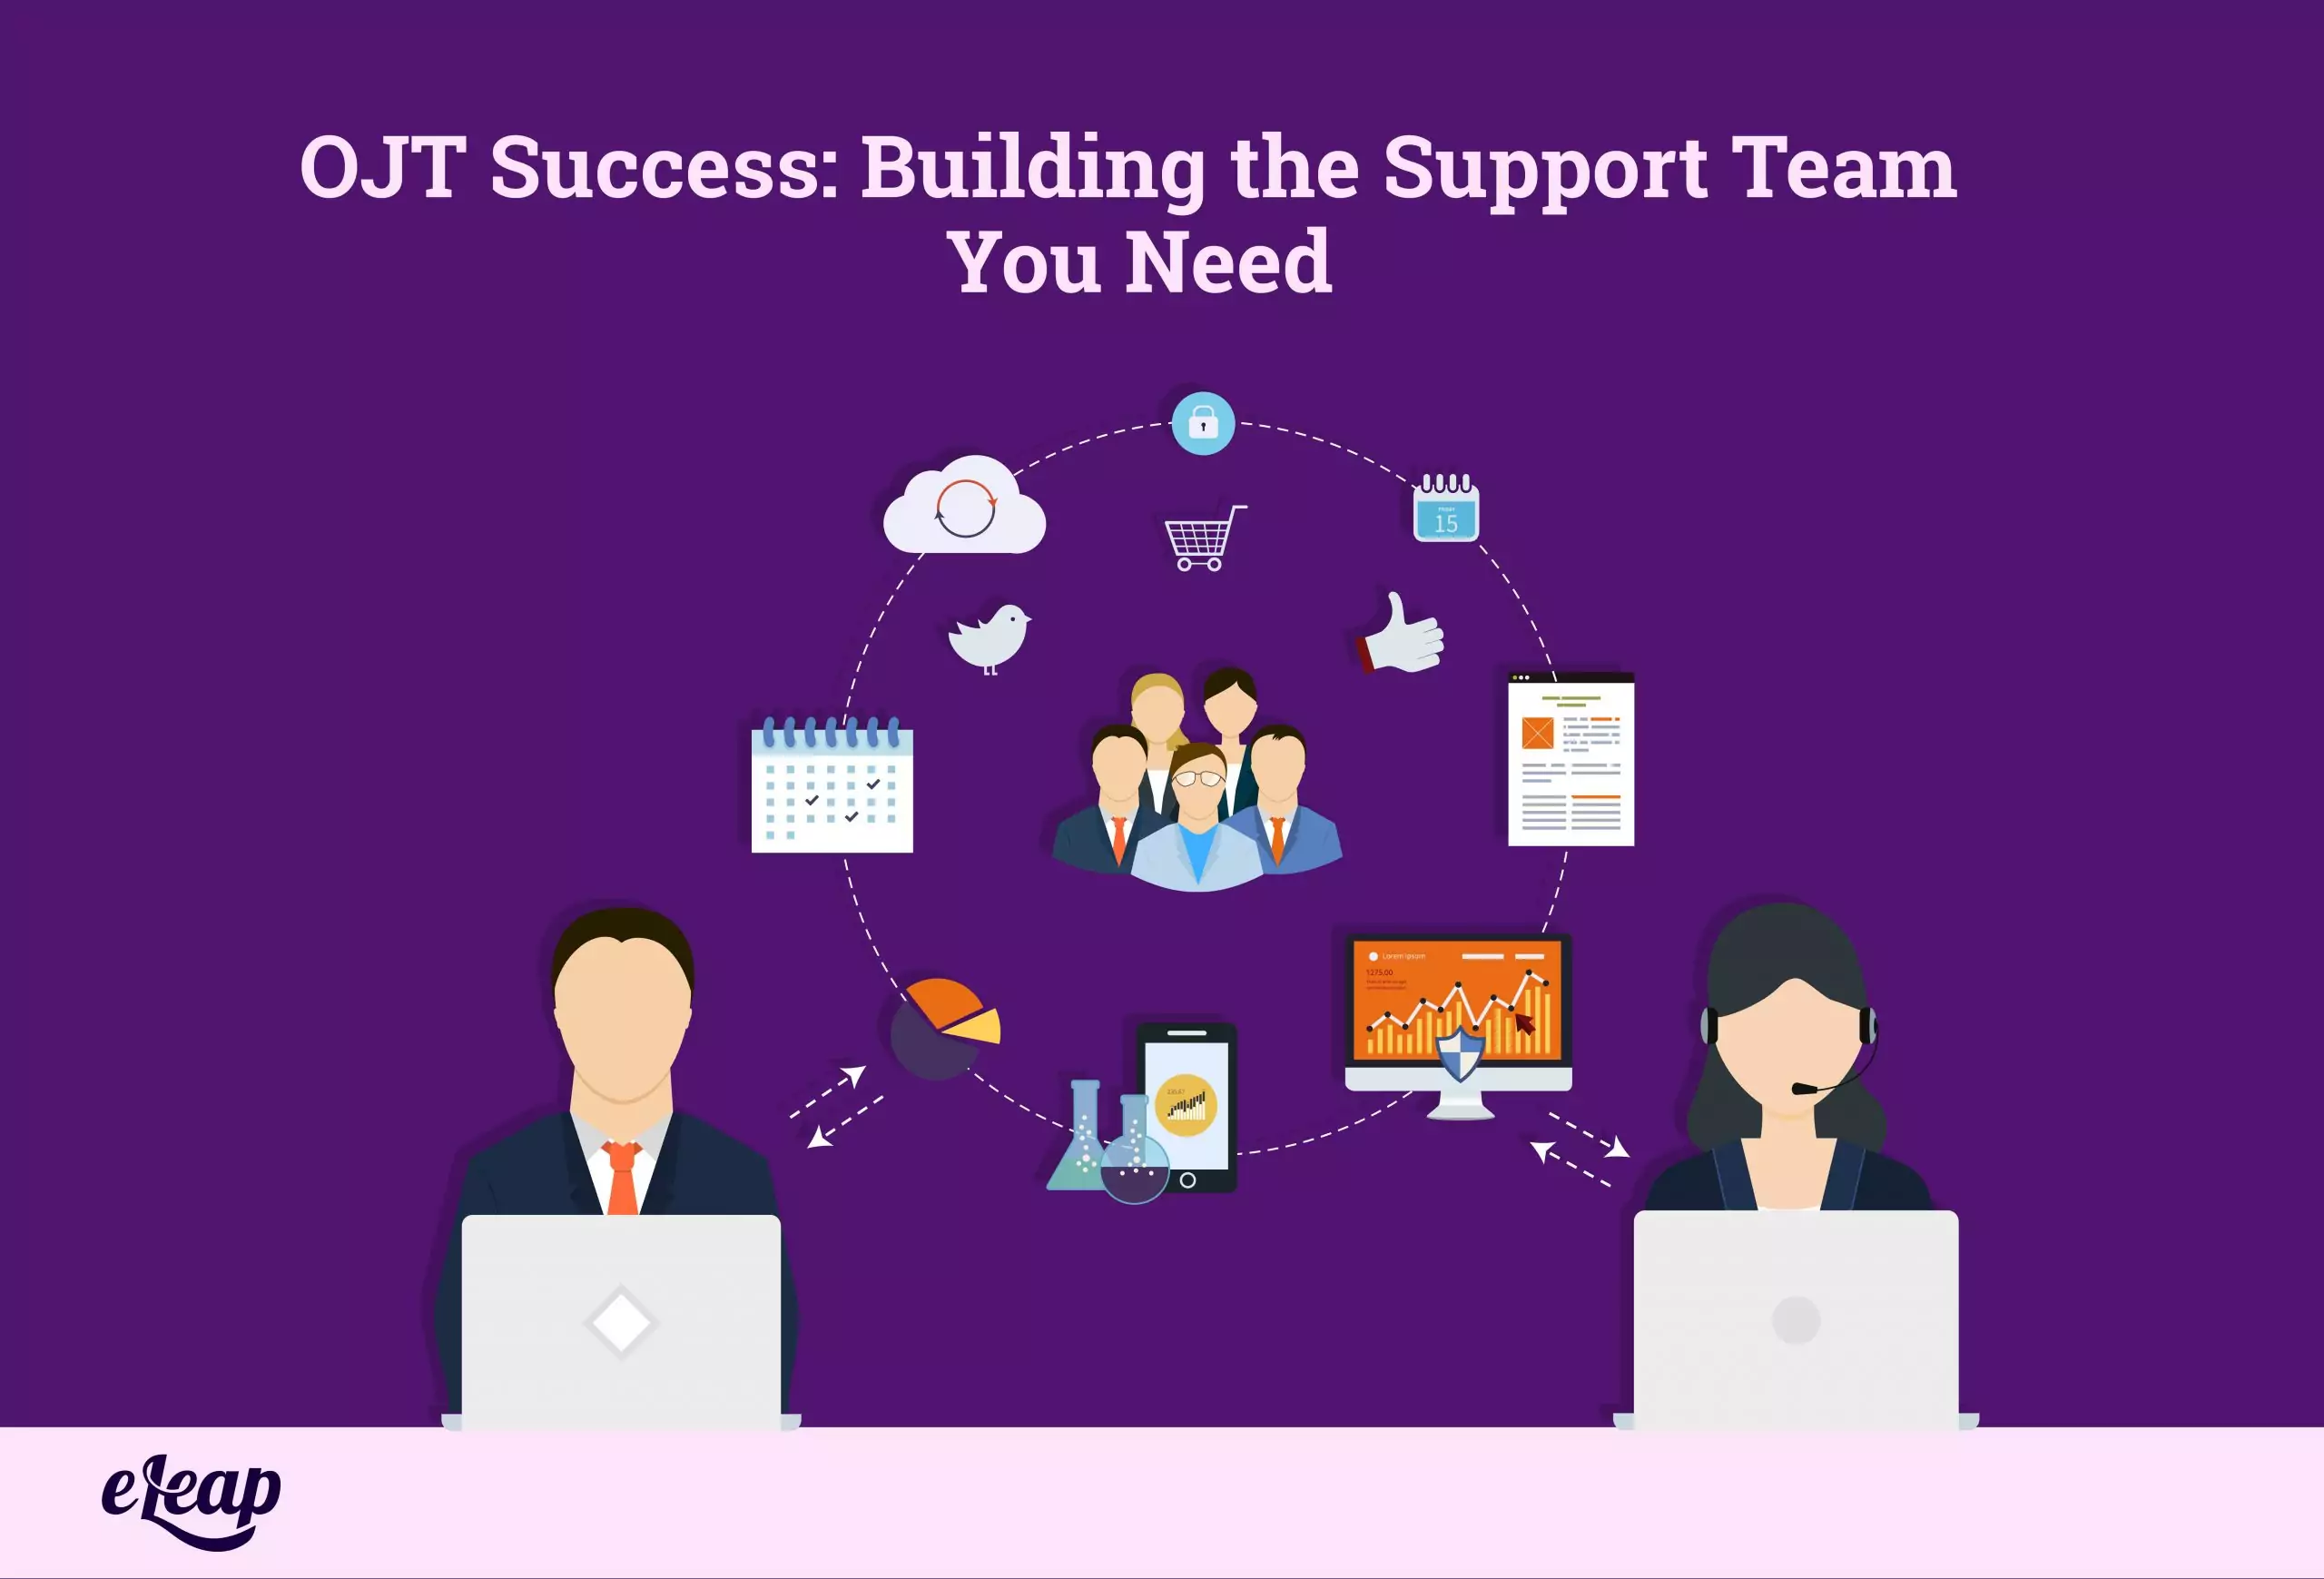 OJT Success: Building the Support Team You Need